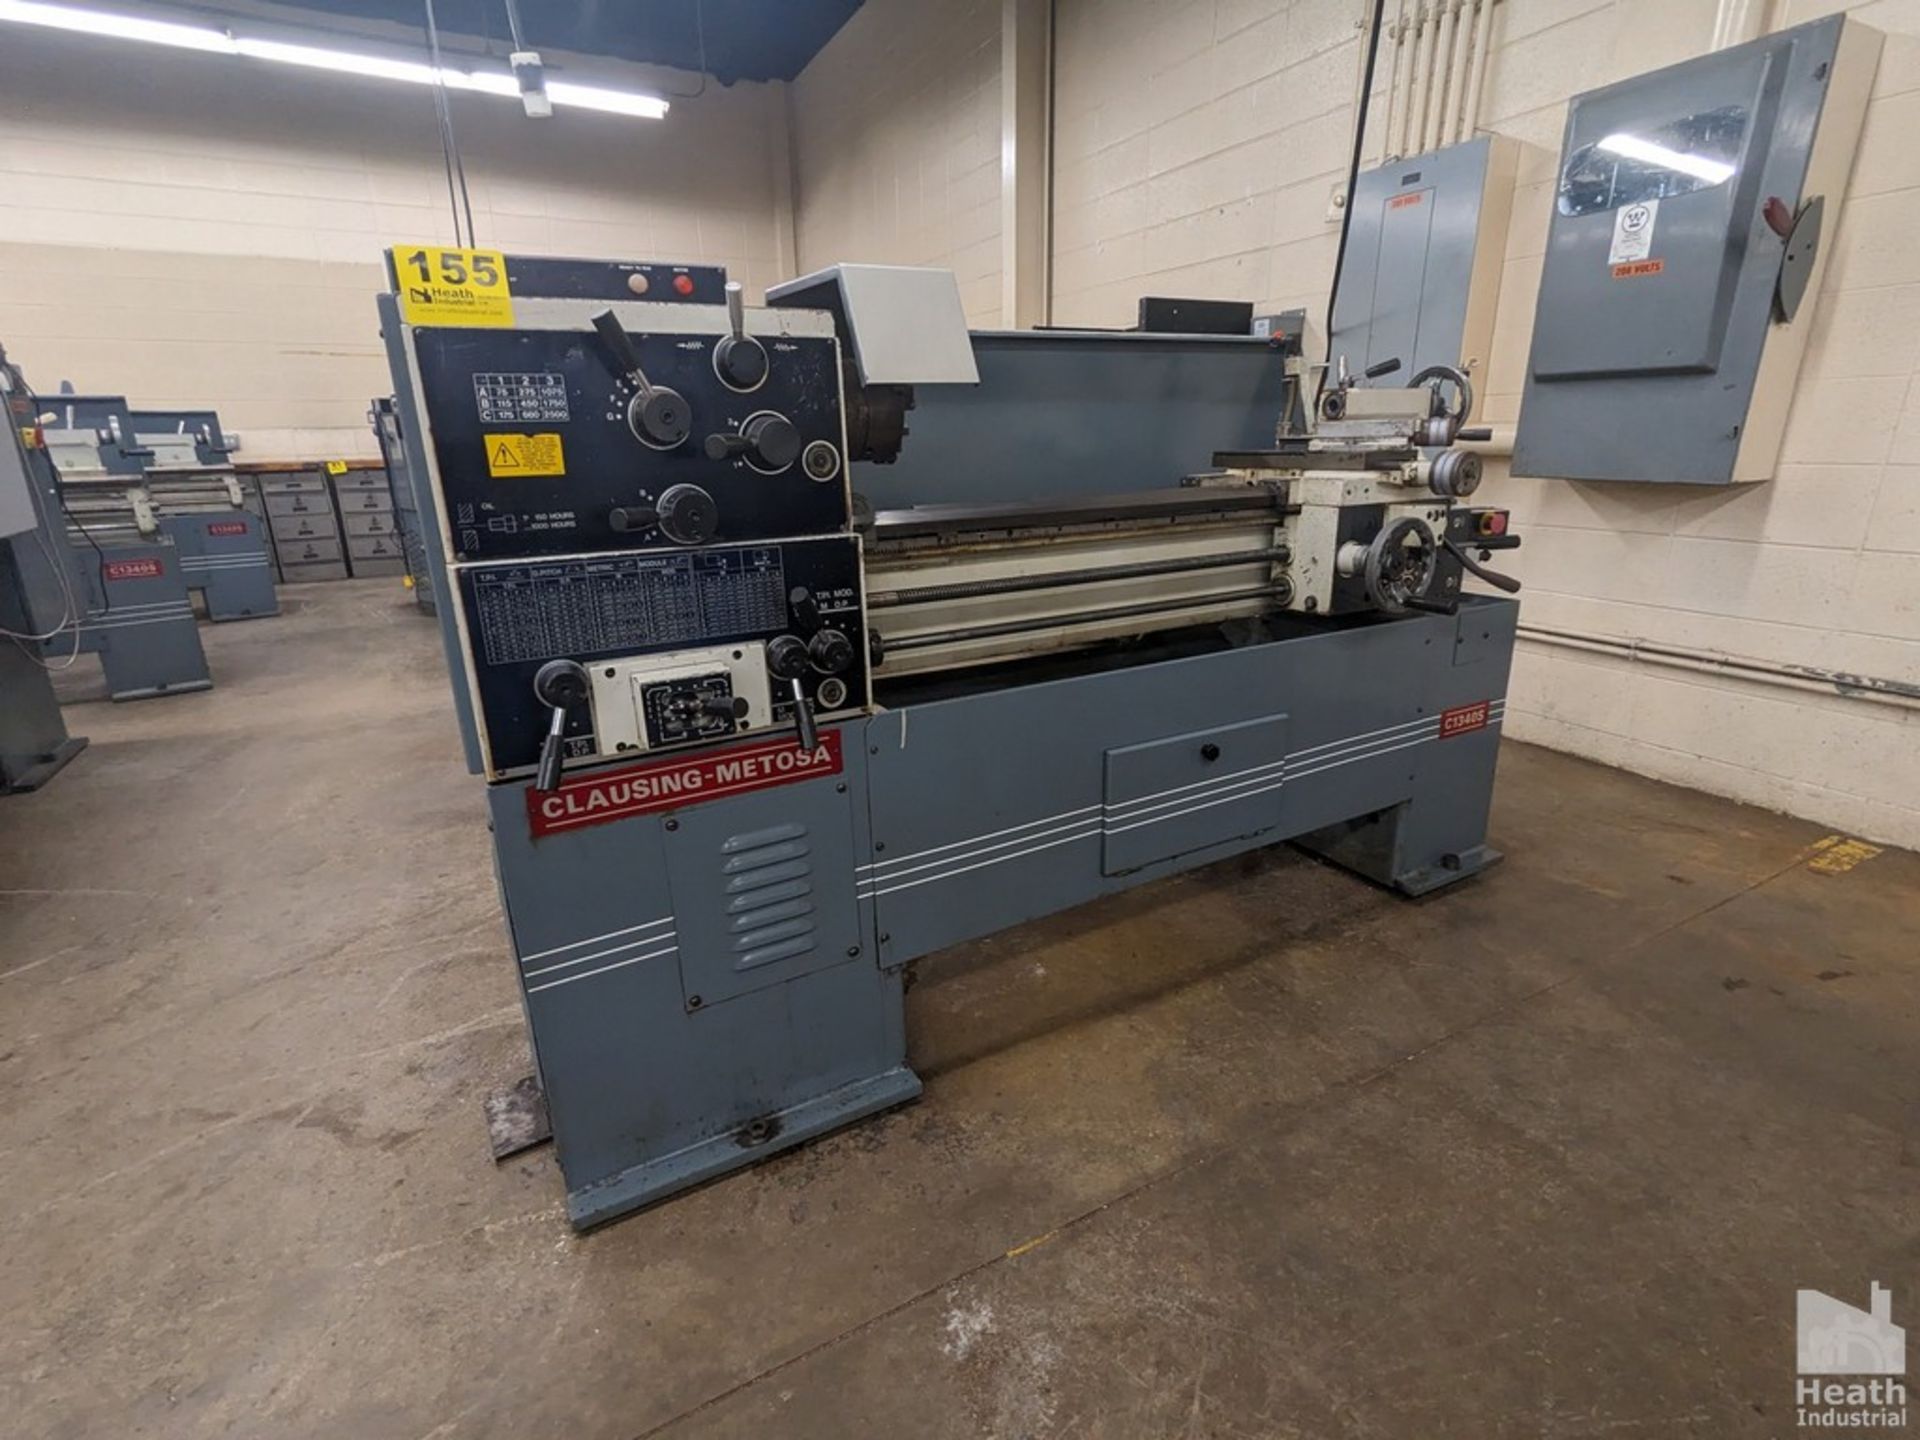 CLAUSING-METOSA 13"X40" MODEL 1340S TOOLROOM LATHE, S/N 33441, 2500 SPINDLE RPM, WITH 6" 3-JAW